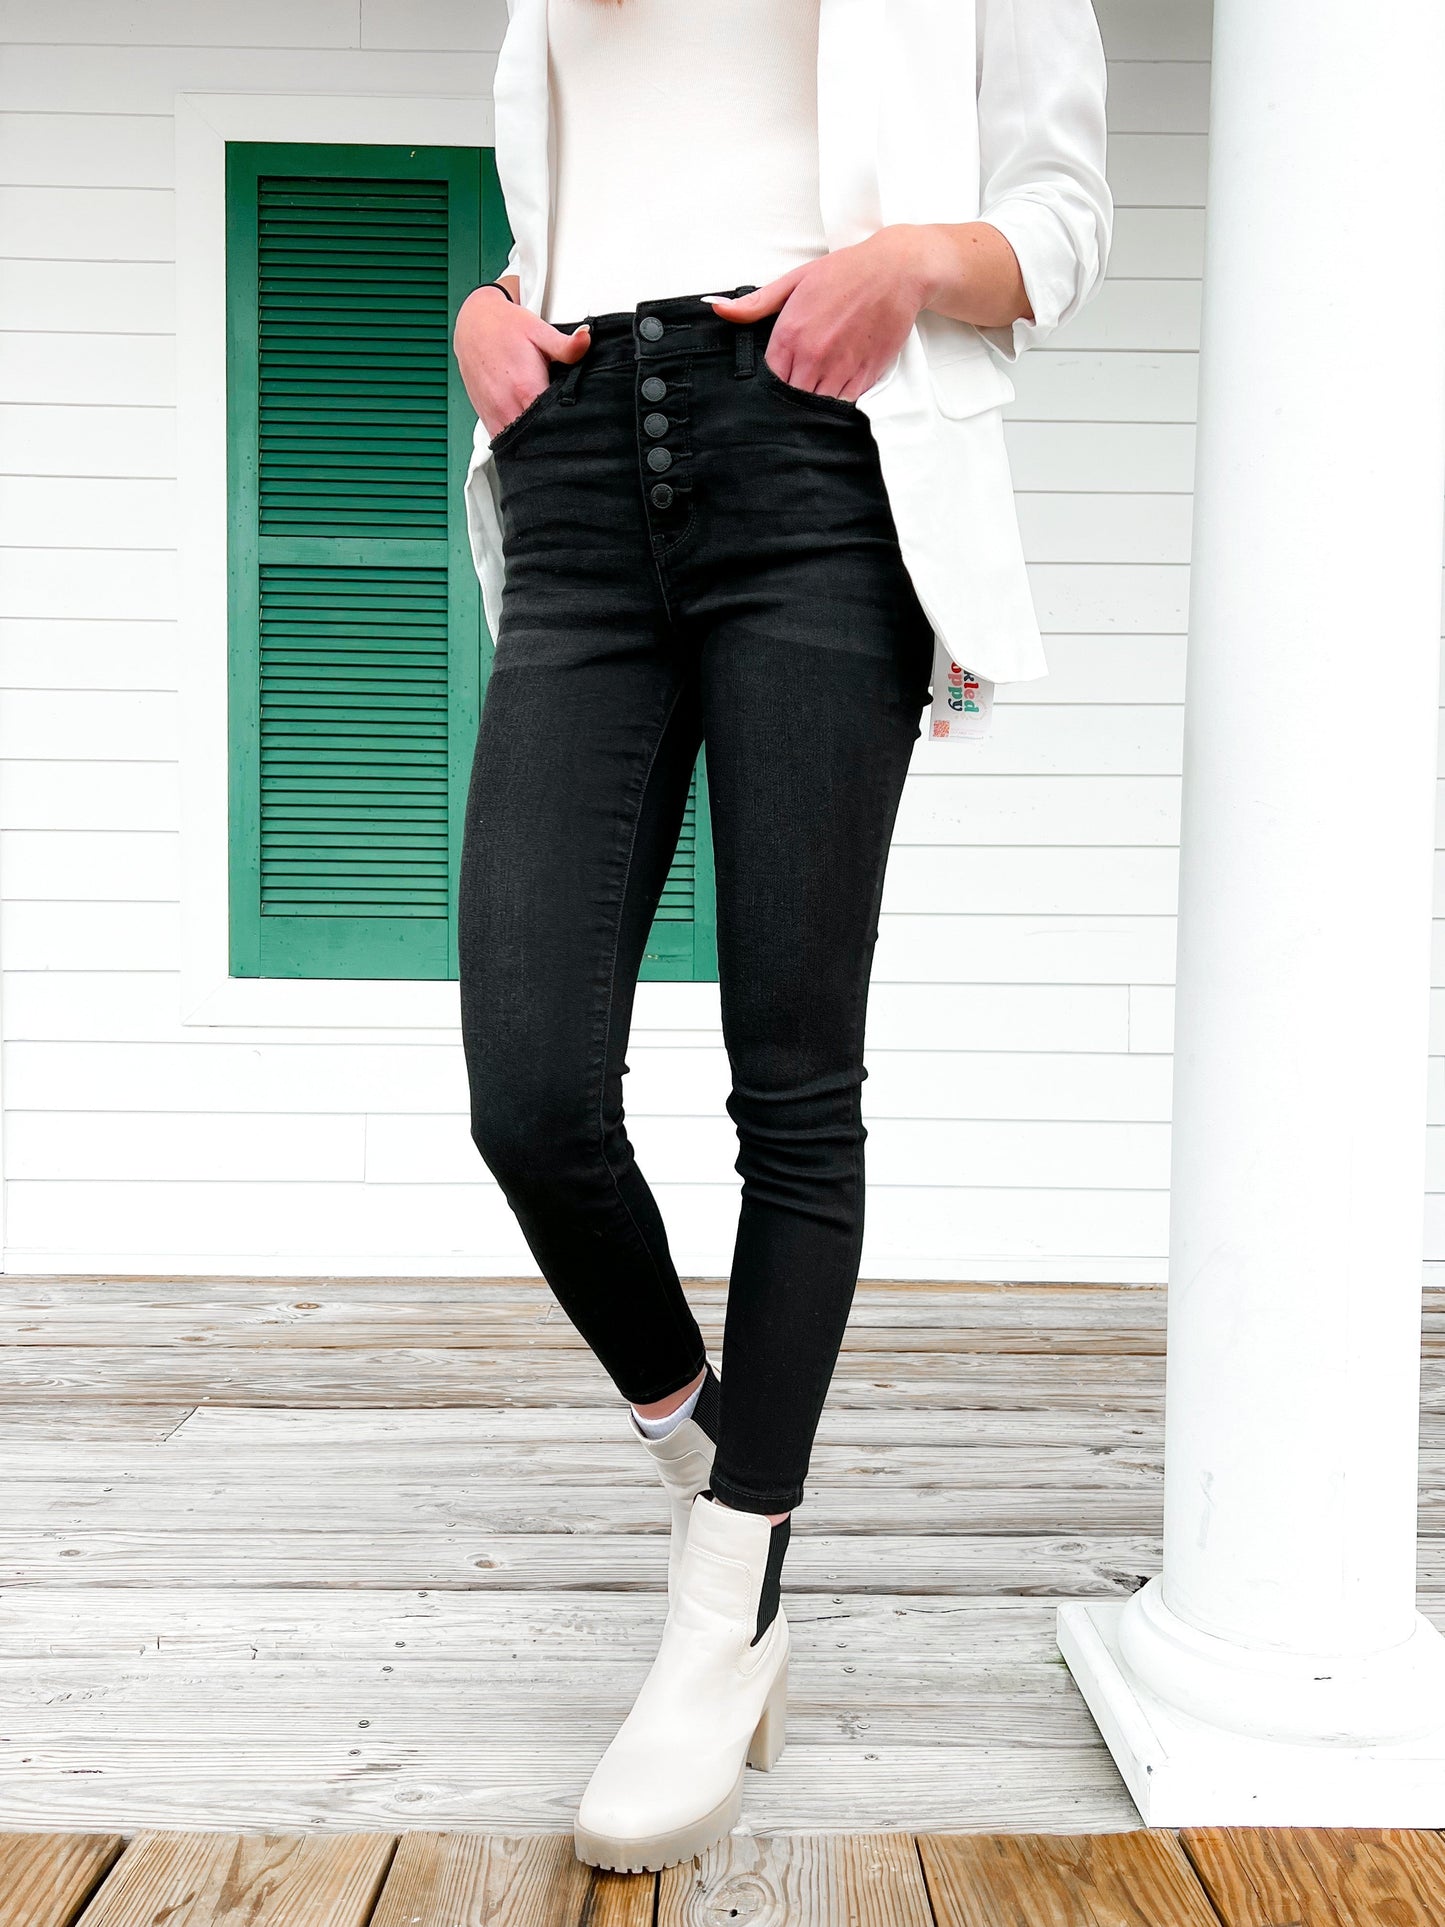 Judy Blue Jet Black Button Fly High Rise Skinny Jeans